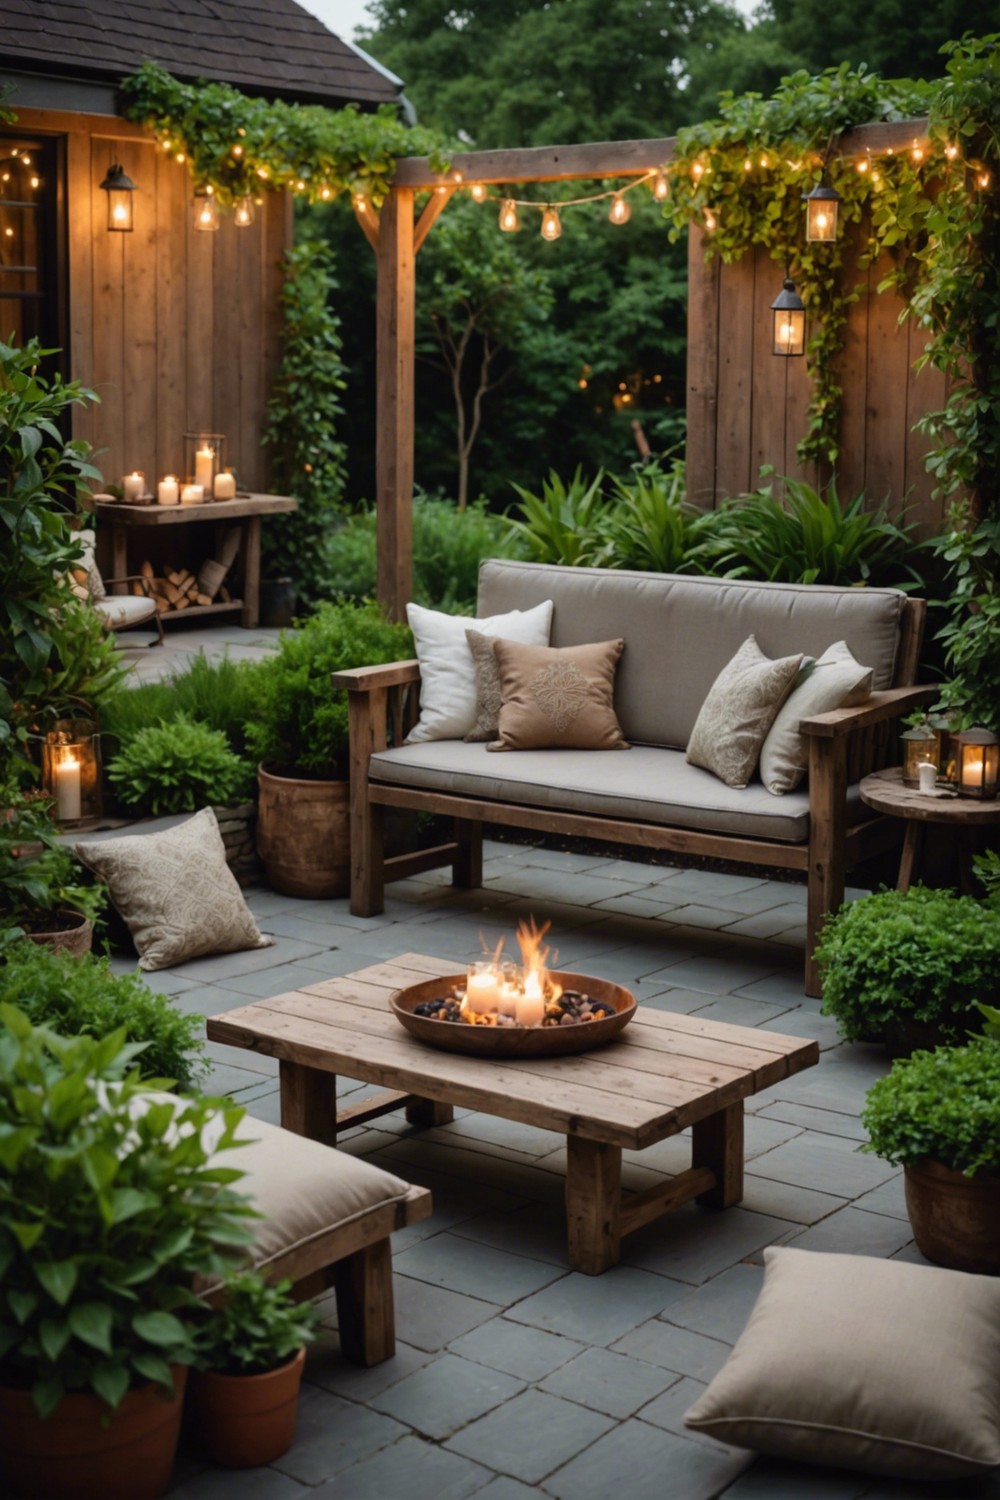 Rustic Wooden Benches for a Cozy Ambiance